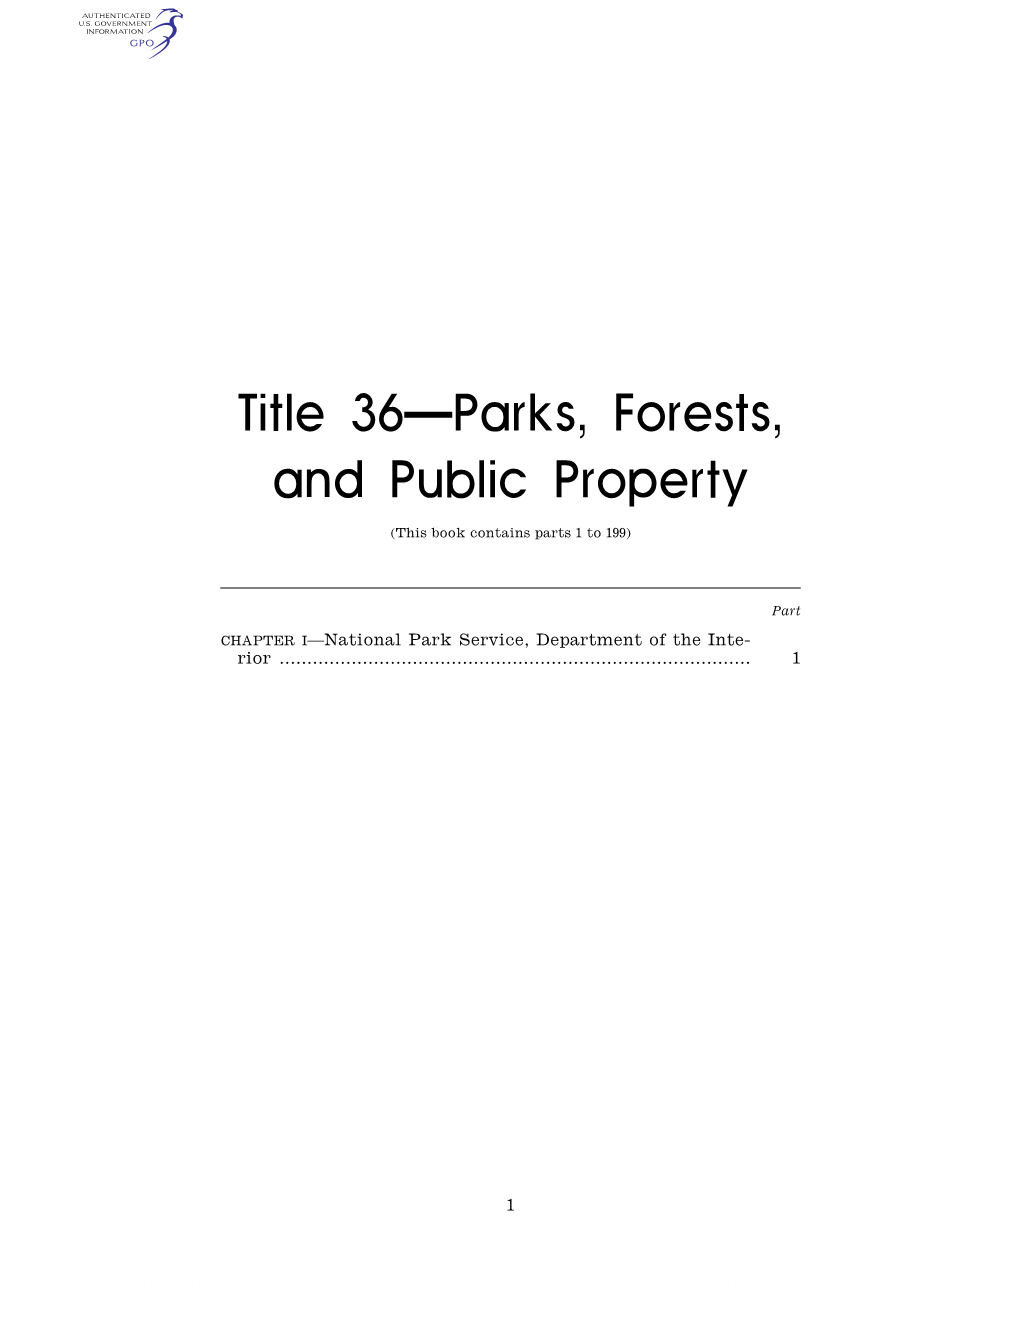 Title 36—Parks, Forests, and Public Property